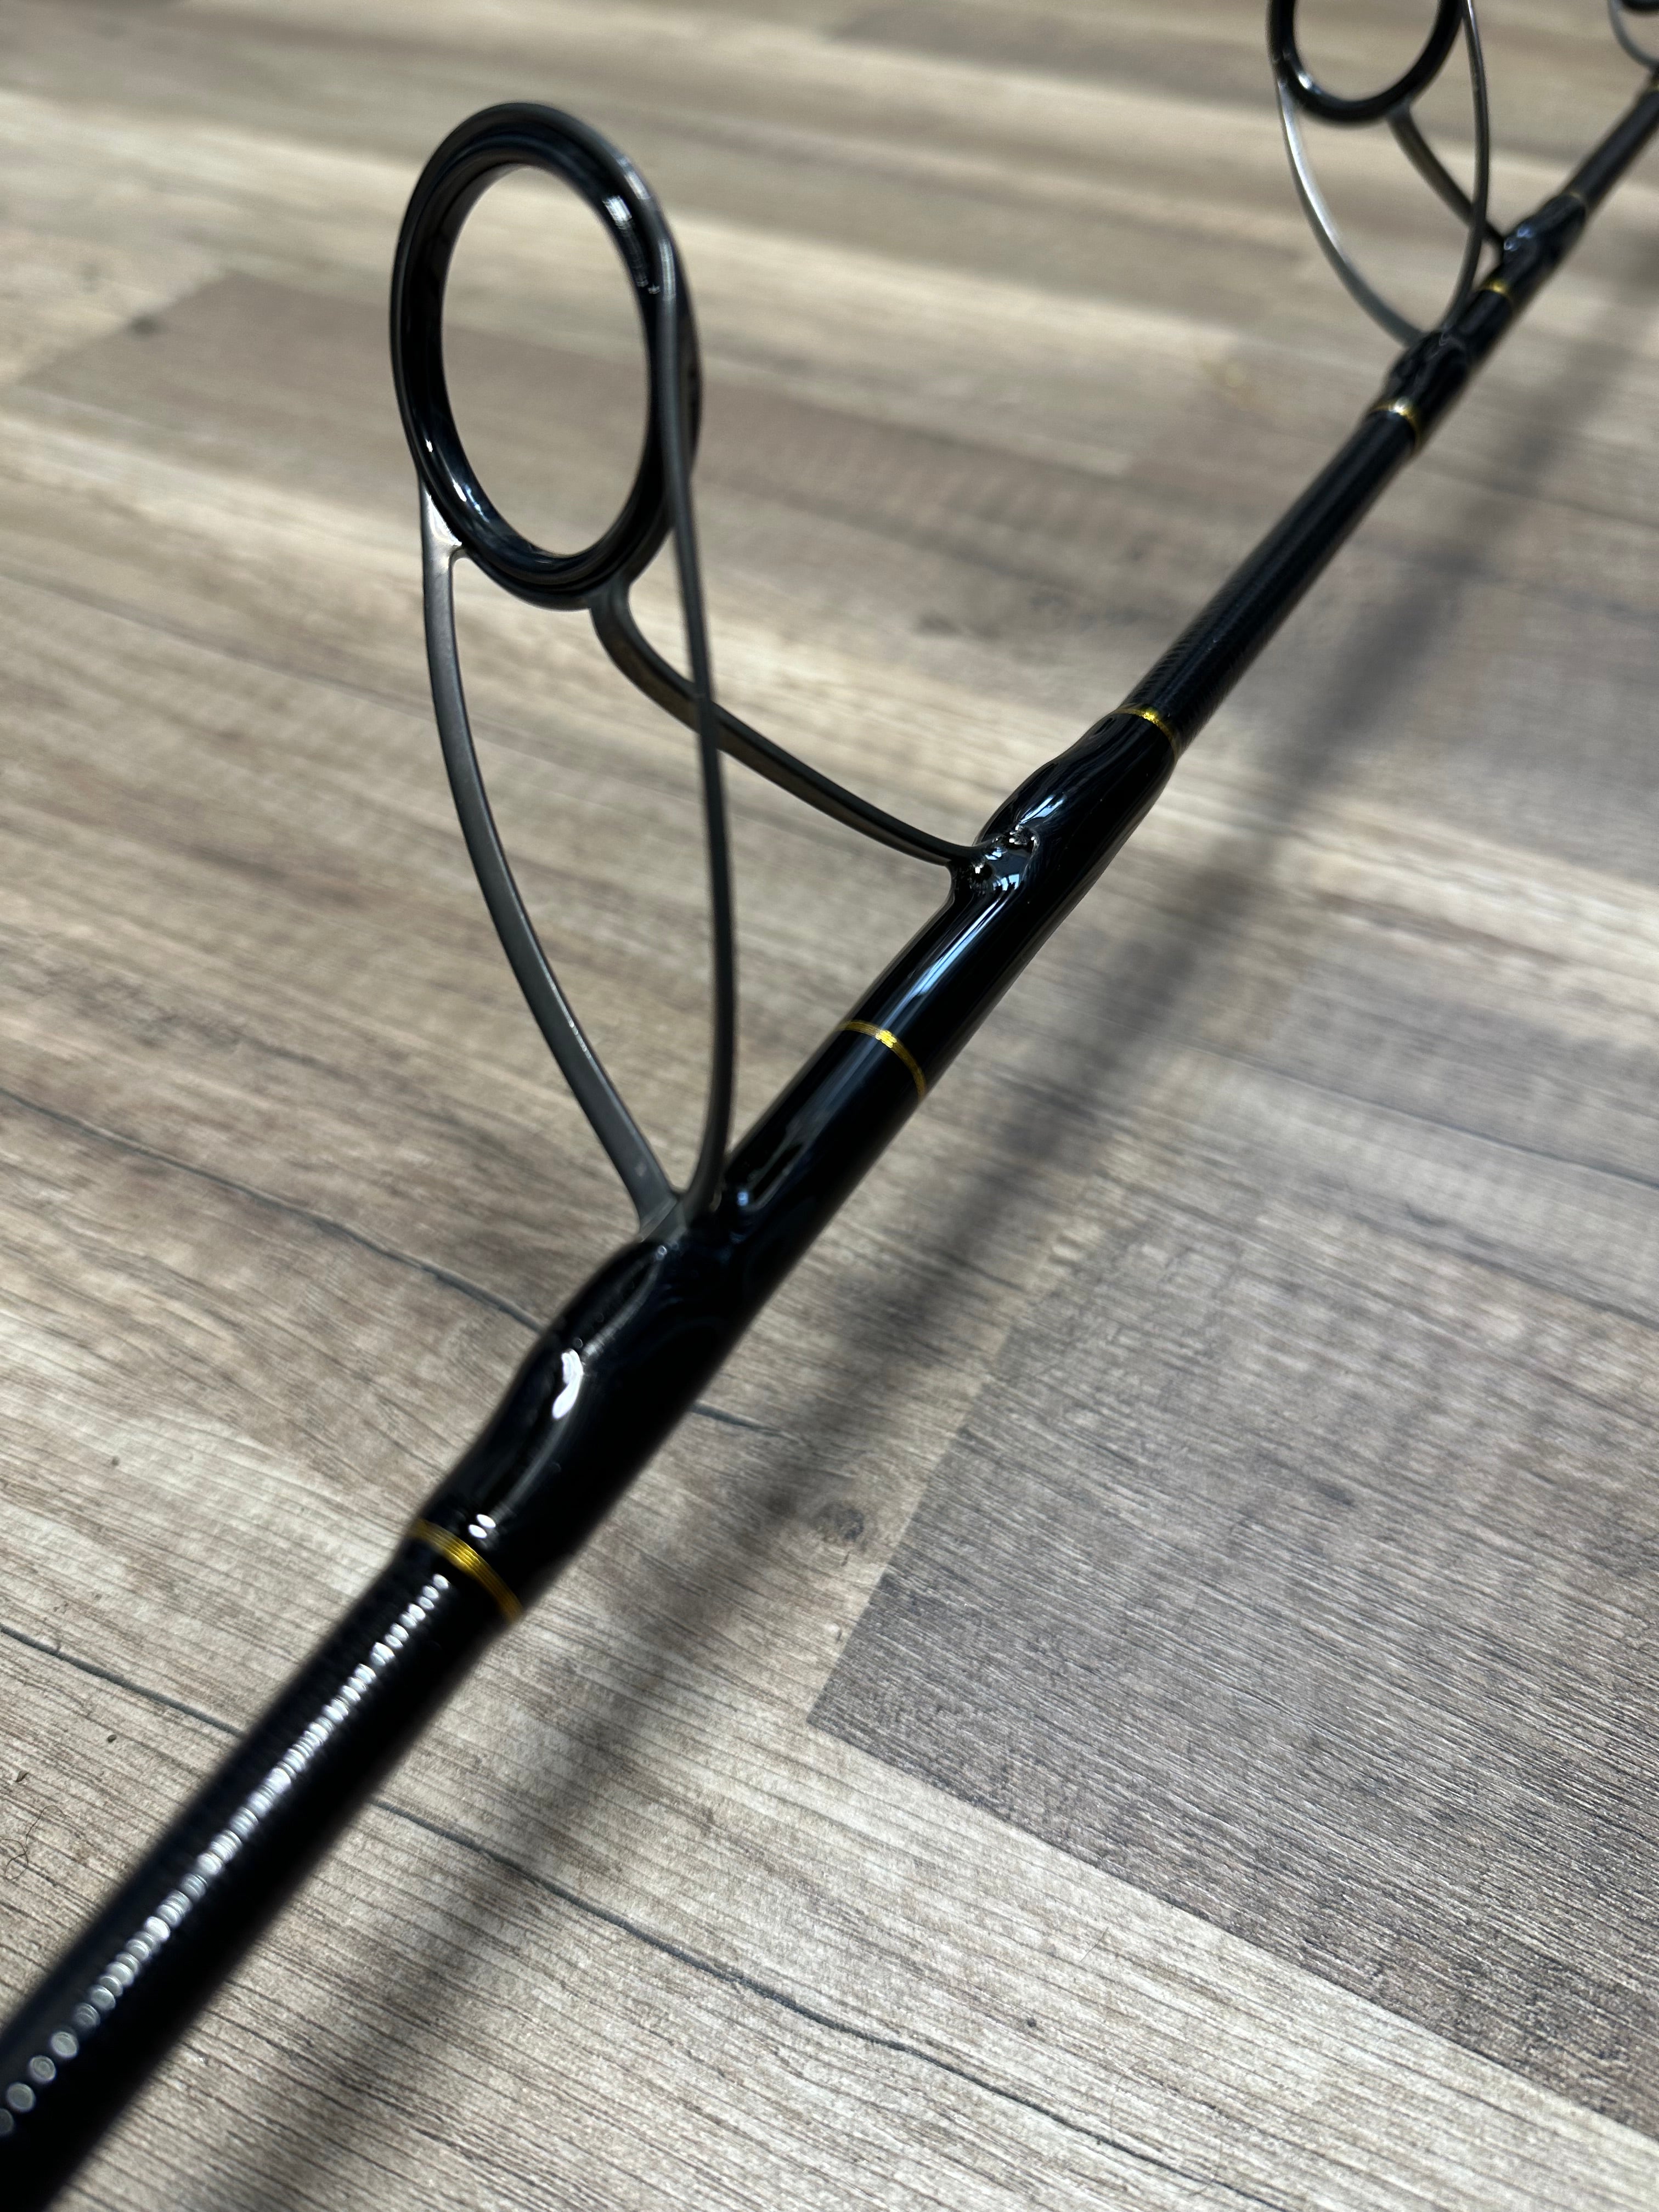 PRE-ORDER: Tuna Jigging Spinning Rod: Mod-Fast Action 5' 9 MH (4oz - 16oz) (SHIP Date 4/22)